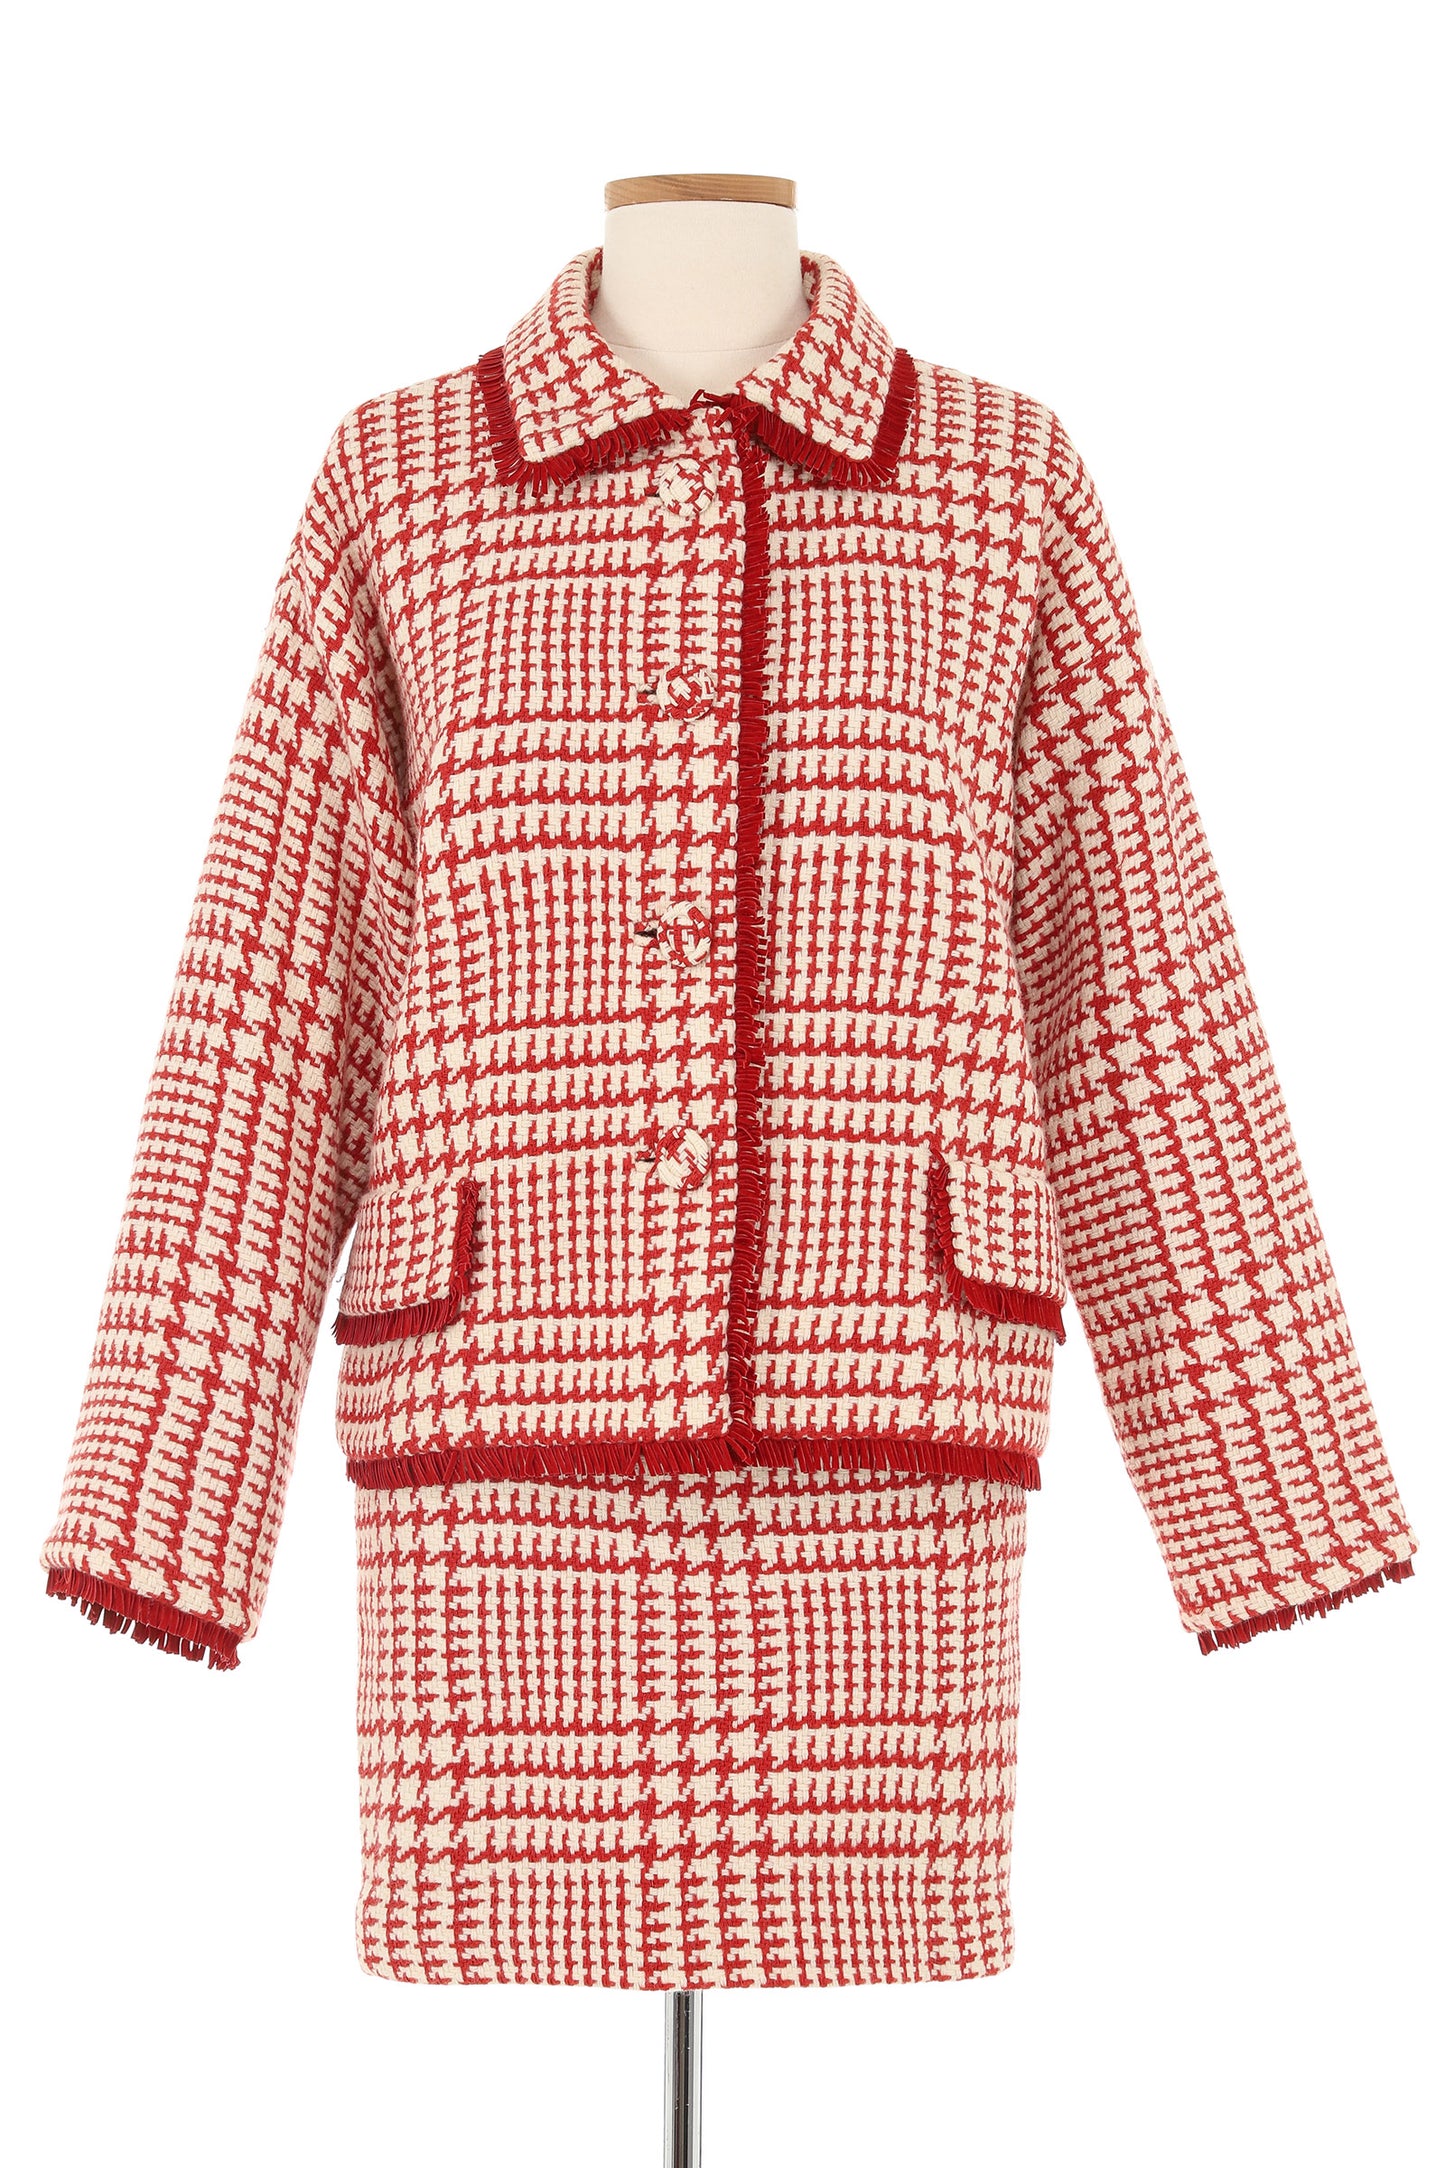 Gianni Versace Red and White Houndstooth Skirt Suit